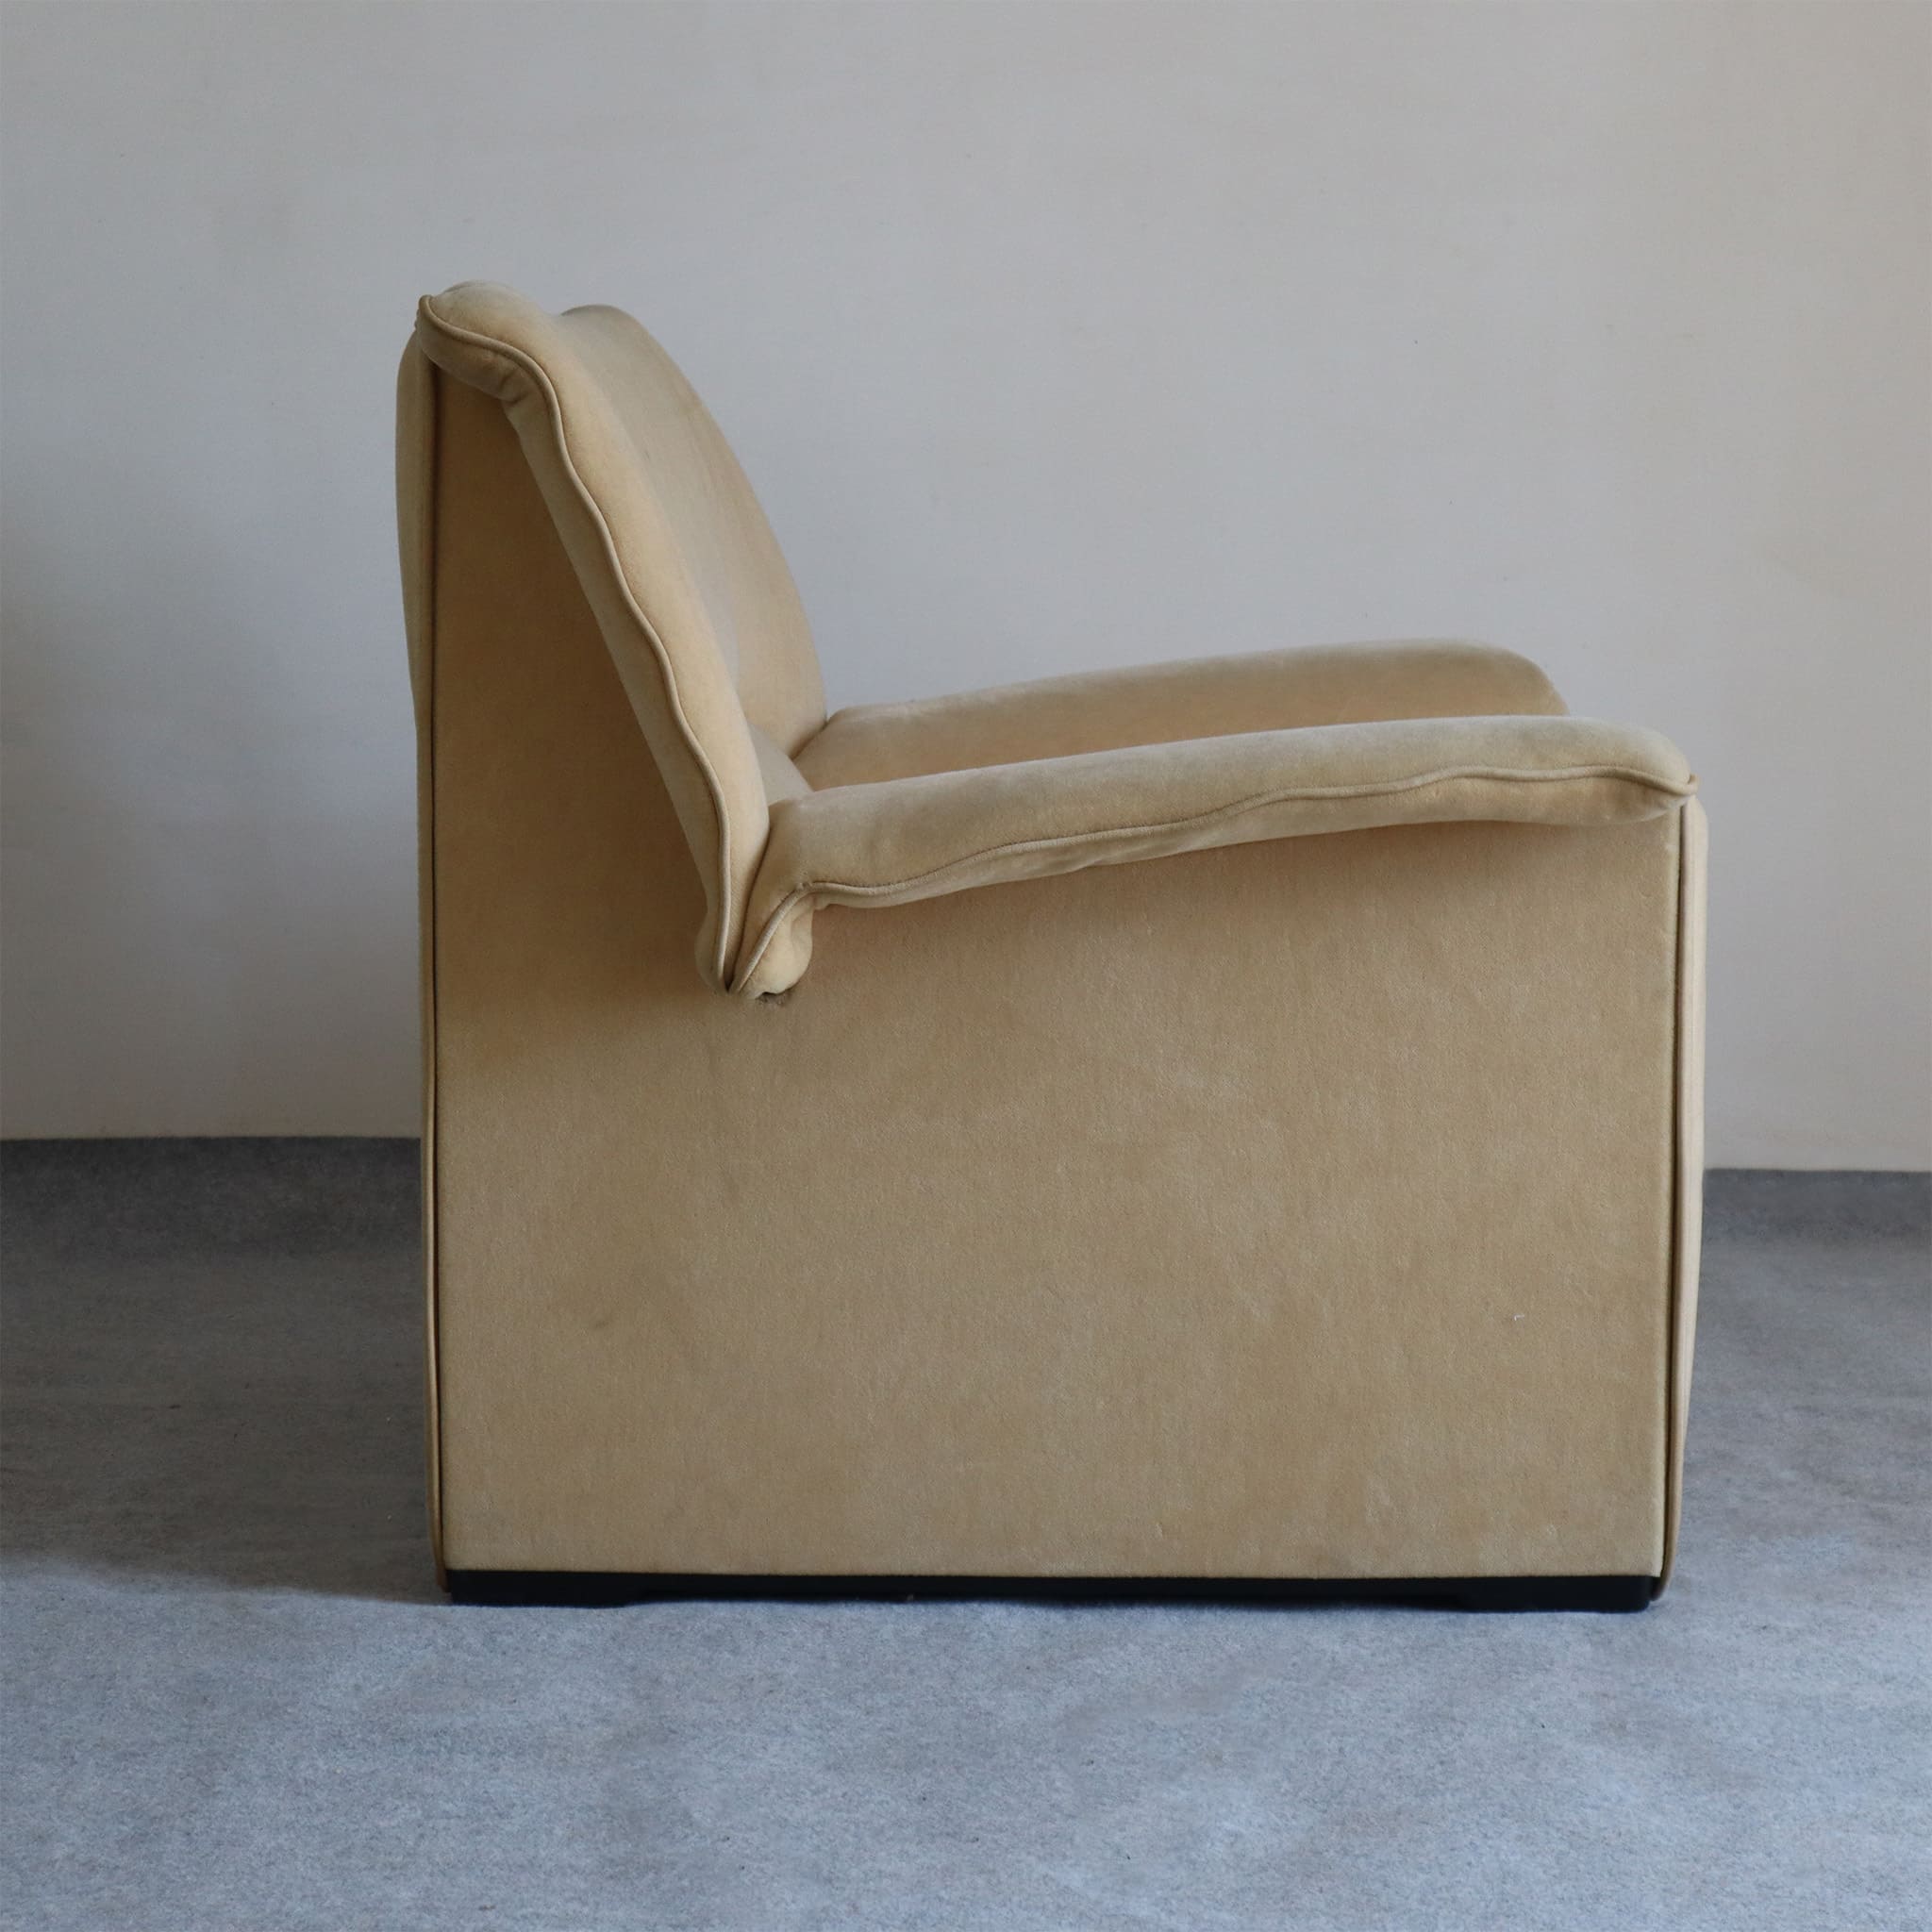 visionidepoca-modern-art-seating-armchair-lauriana-b&b-italia-by-afra-e-tobia-scarpa-made-in-italy-70s-side-view-2